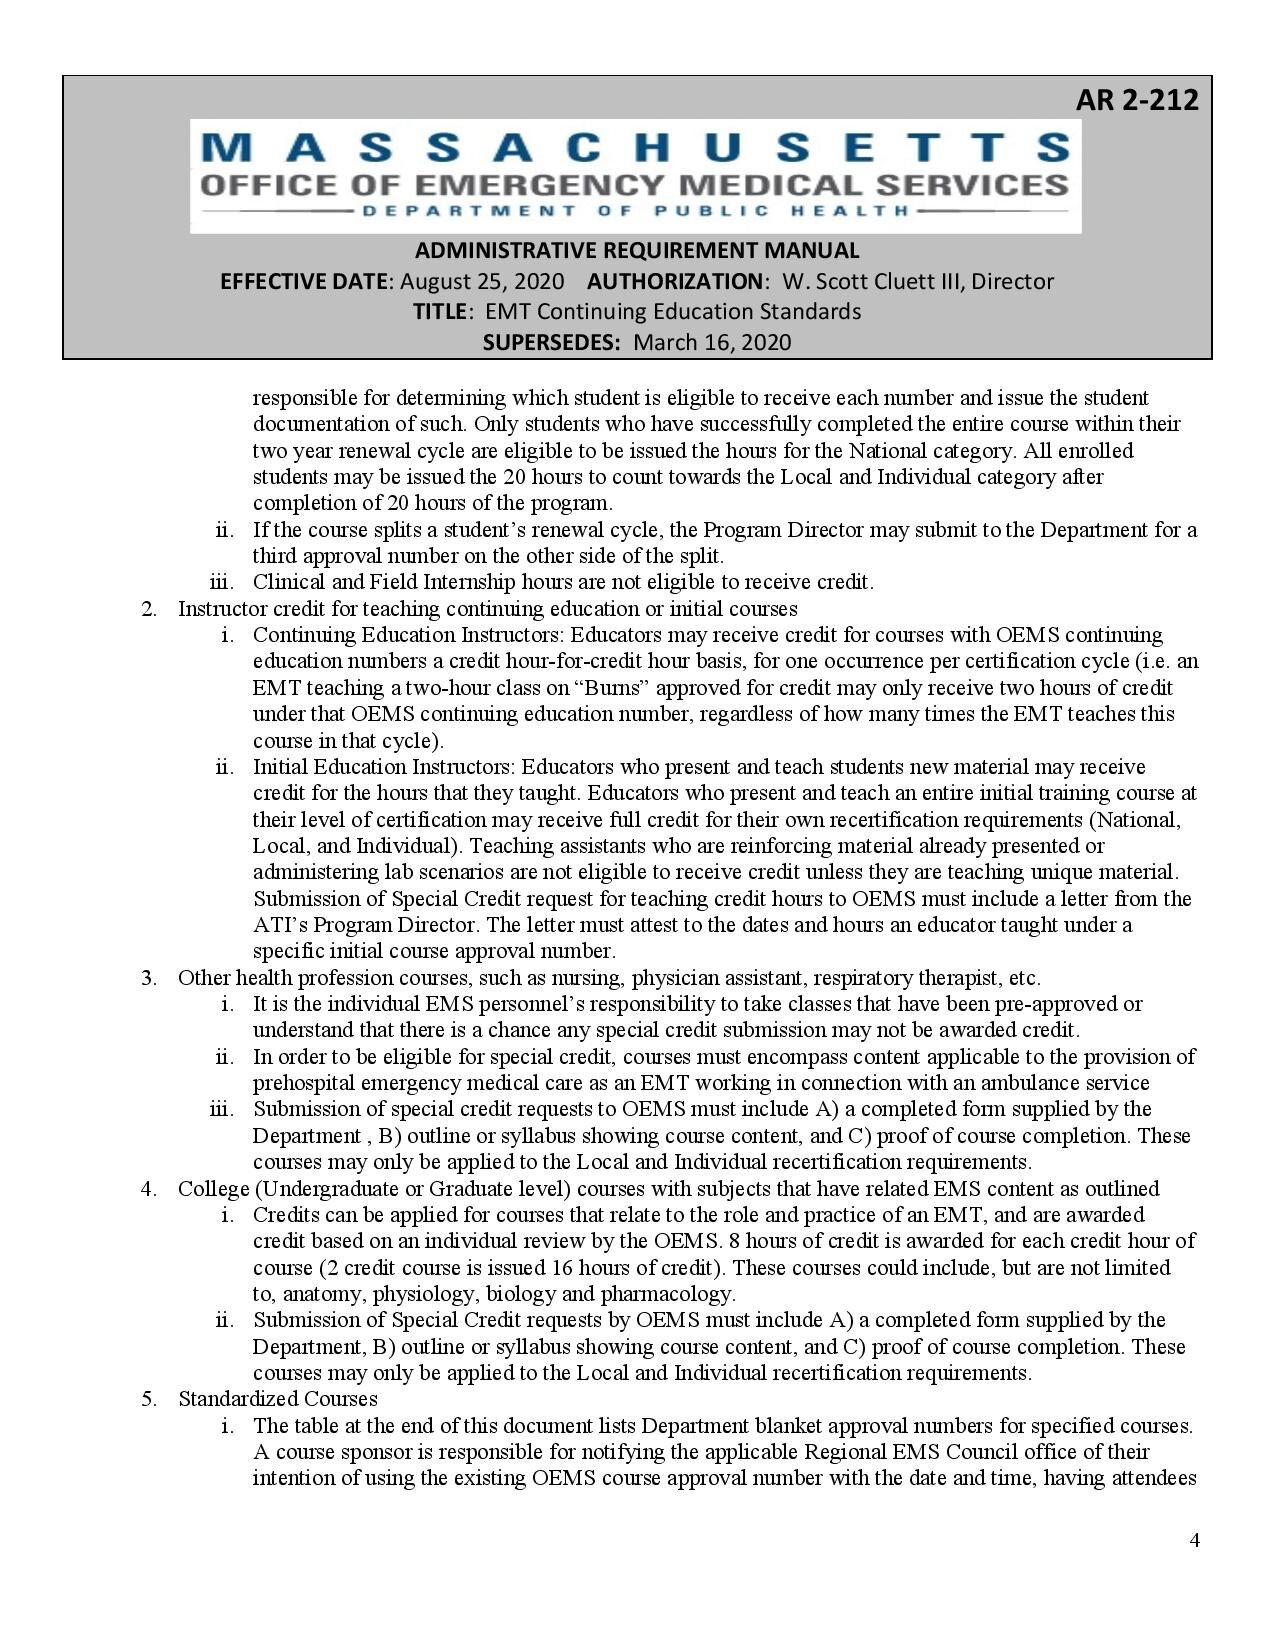 ar-2-212-emt-continuing-education-standards august 2020-page-004.jpg